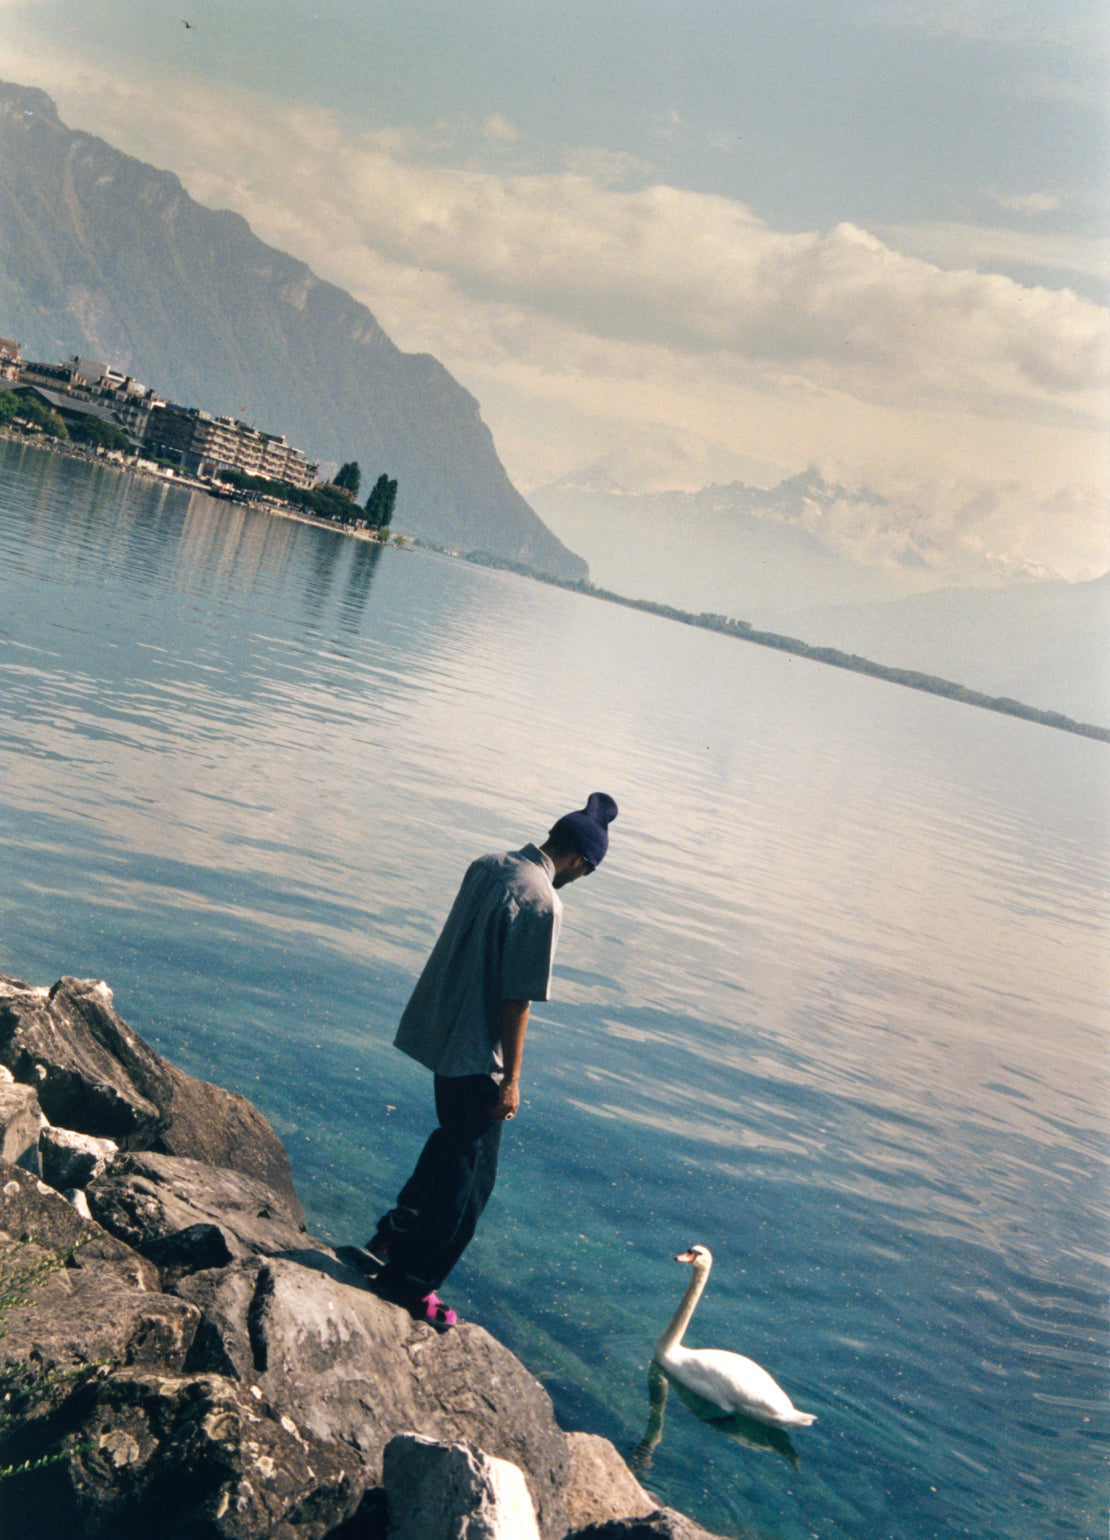 Wesley Joseph wearing Clink Heart Shirt in Wax, next to a duck in a lake valley of mountains.